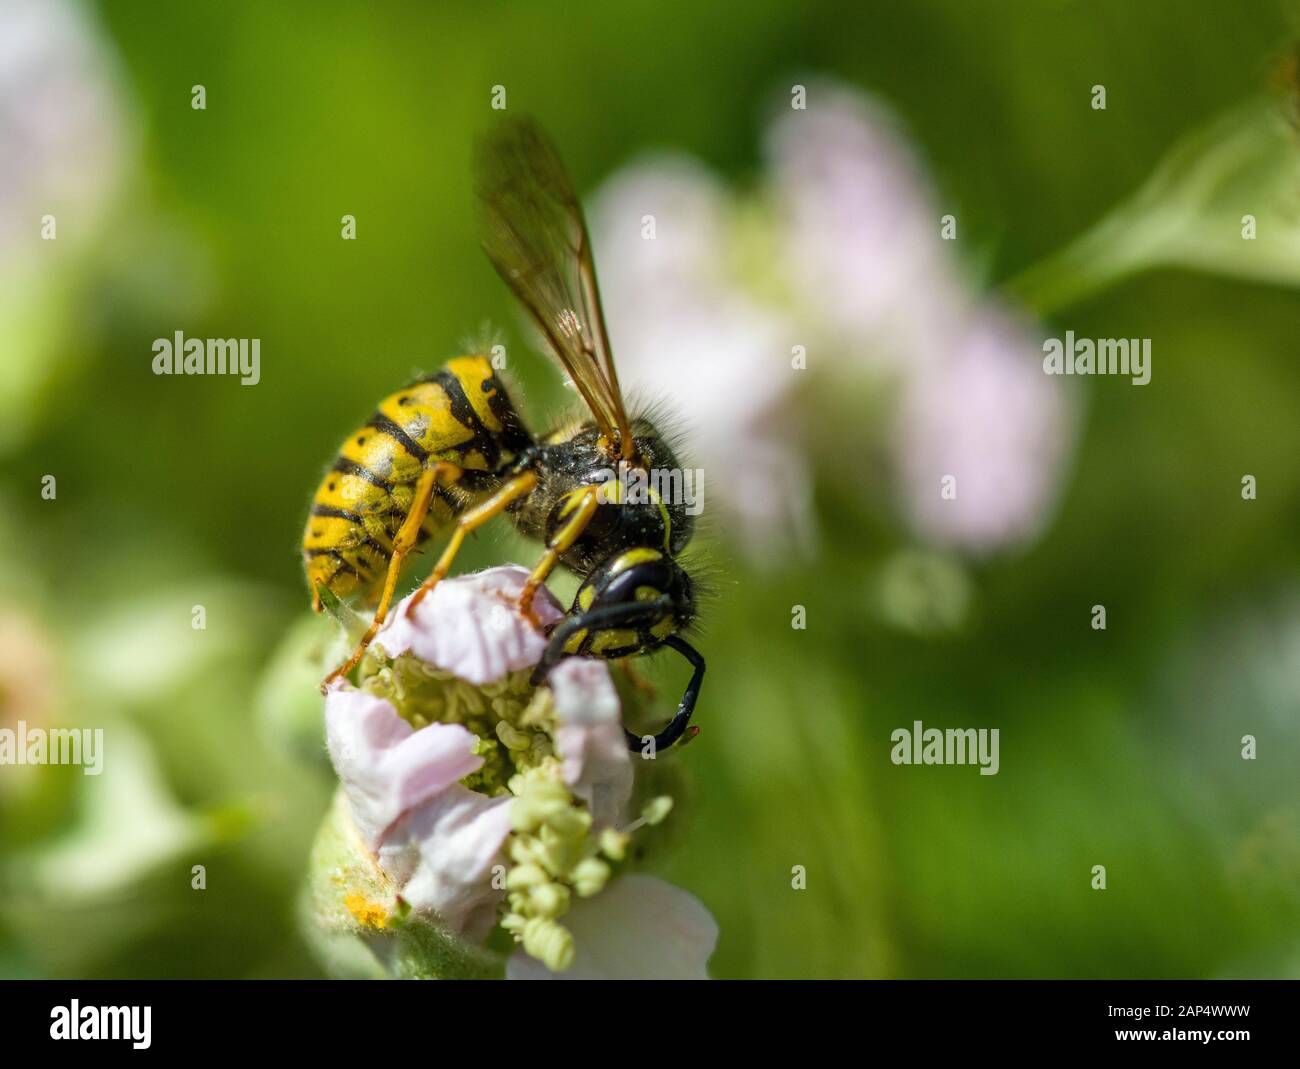 The Common Wasp, Vespula vulgaris, on a pink flower in the height of summer. Its distinctive yellow and black serves as a warning! Stock Photo